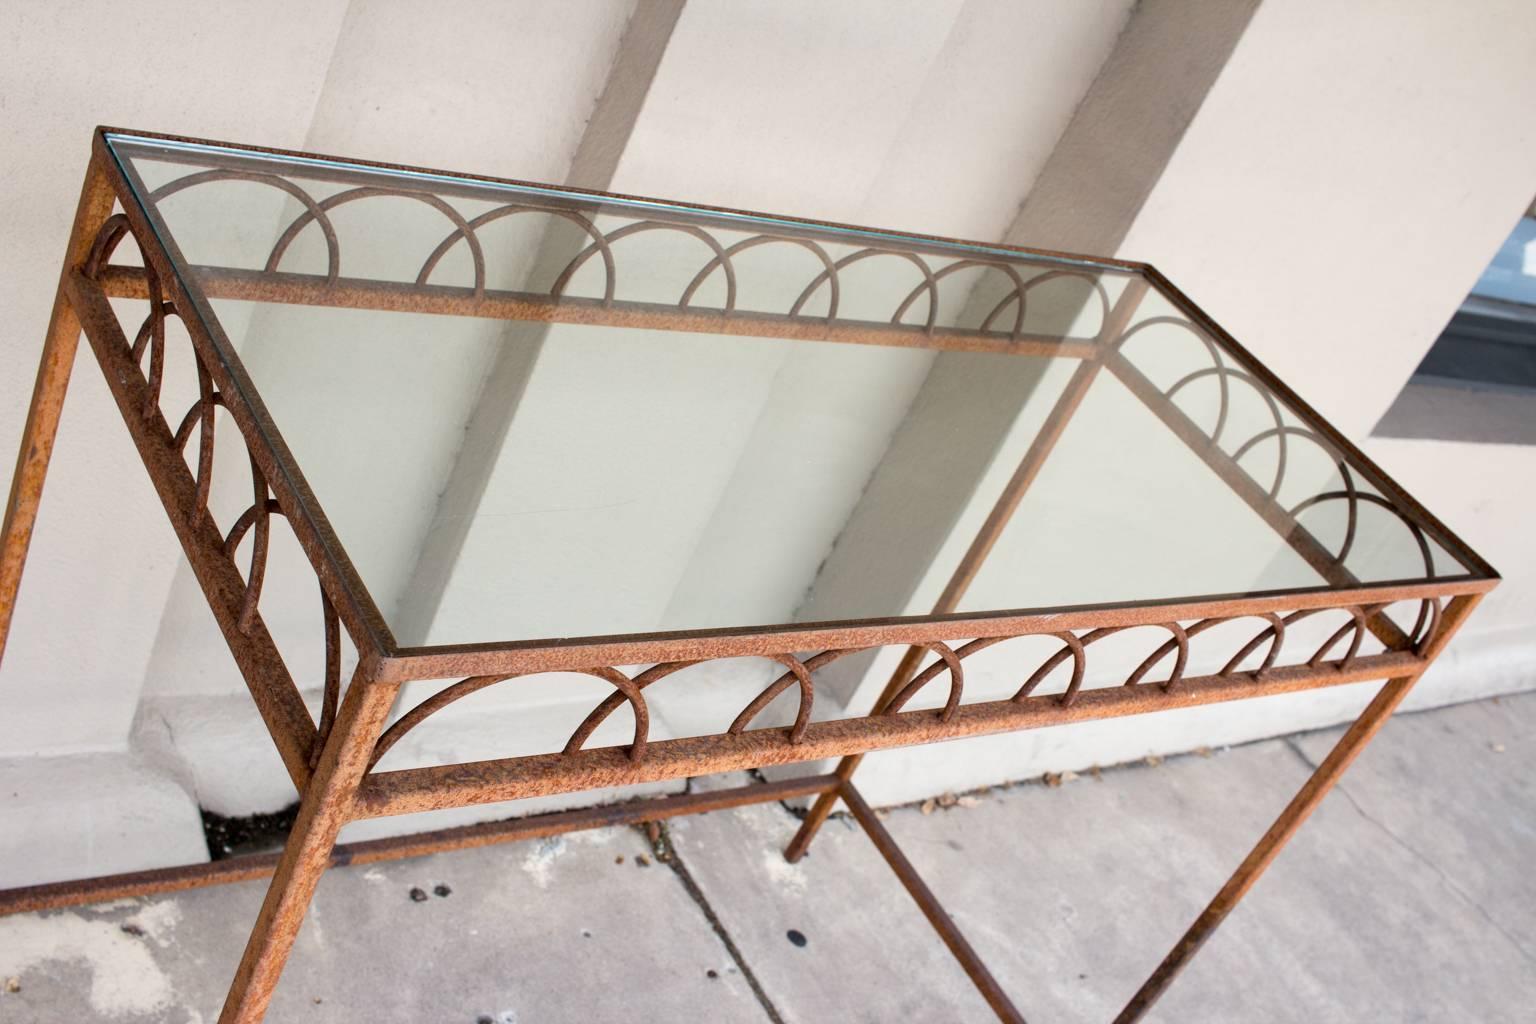 20th Century Antique French Iron & Glass Bar Height Console Table from a Parisian Flower Shop